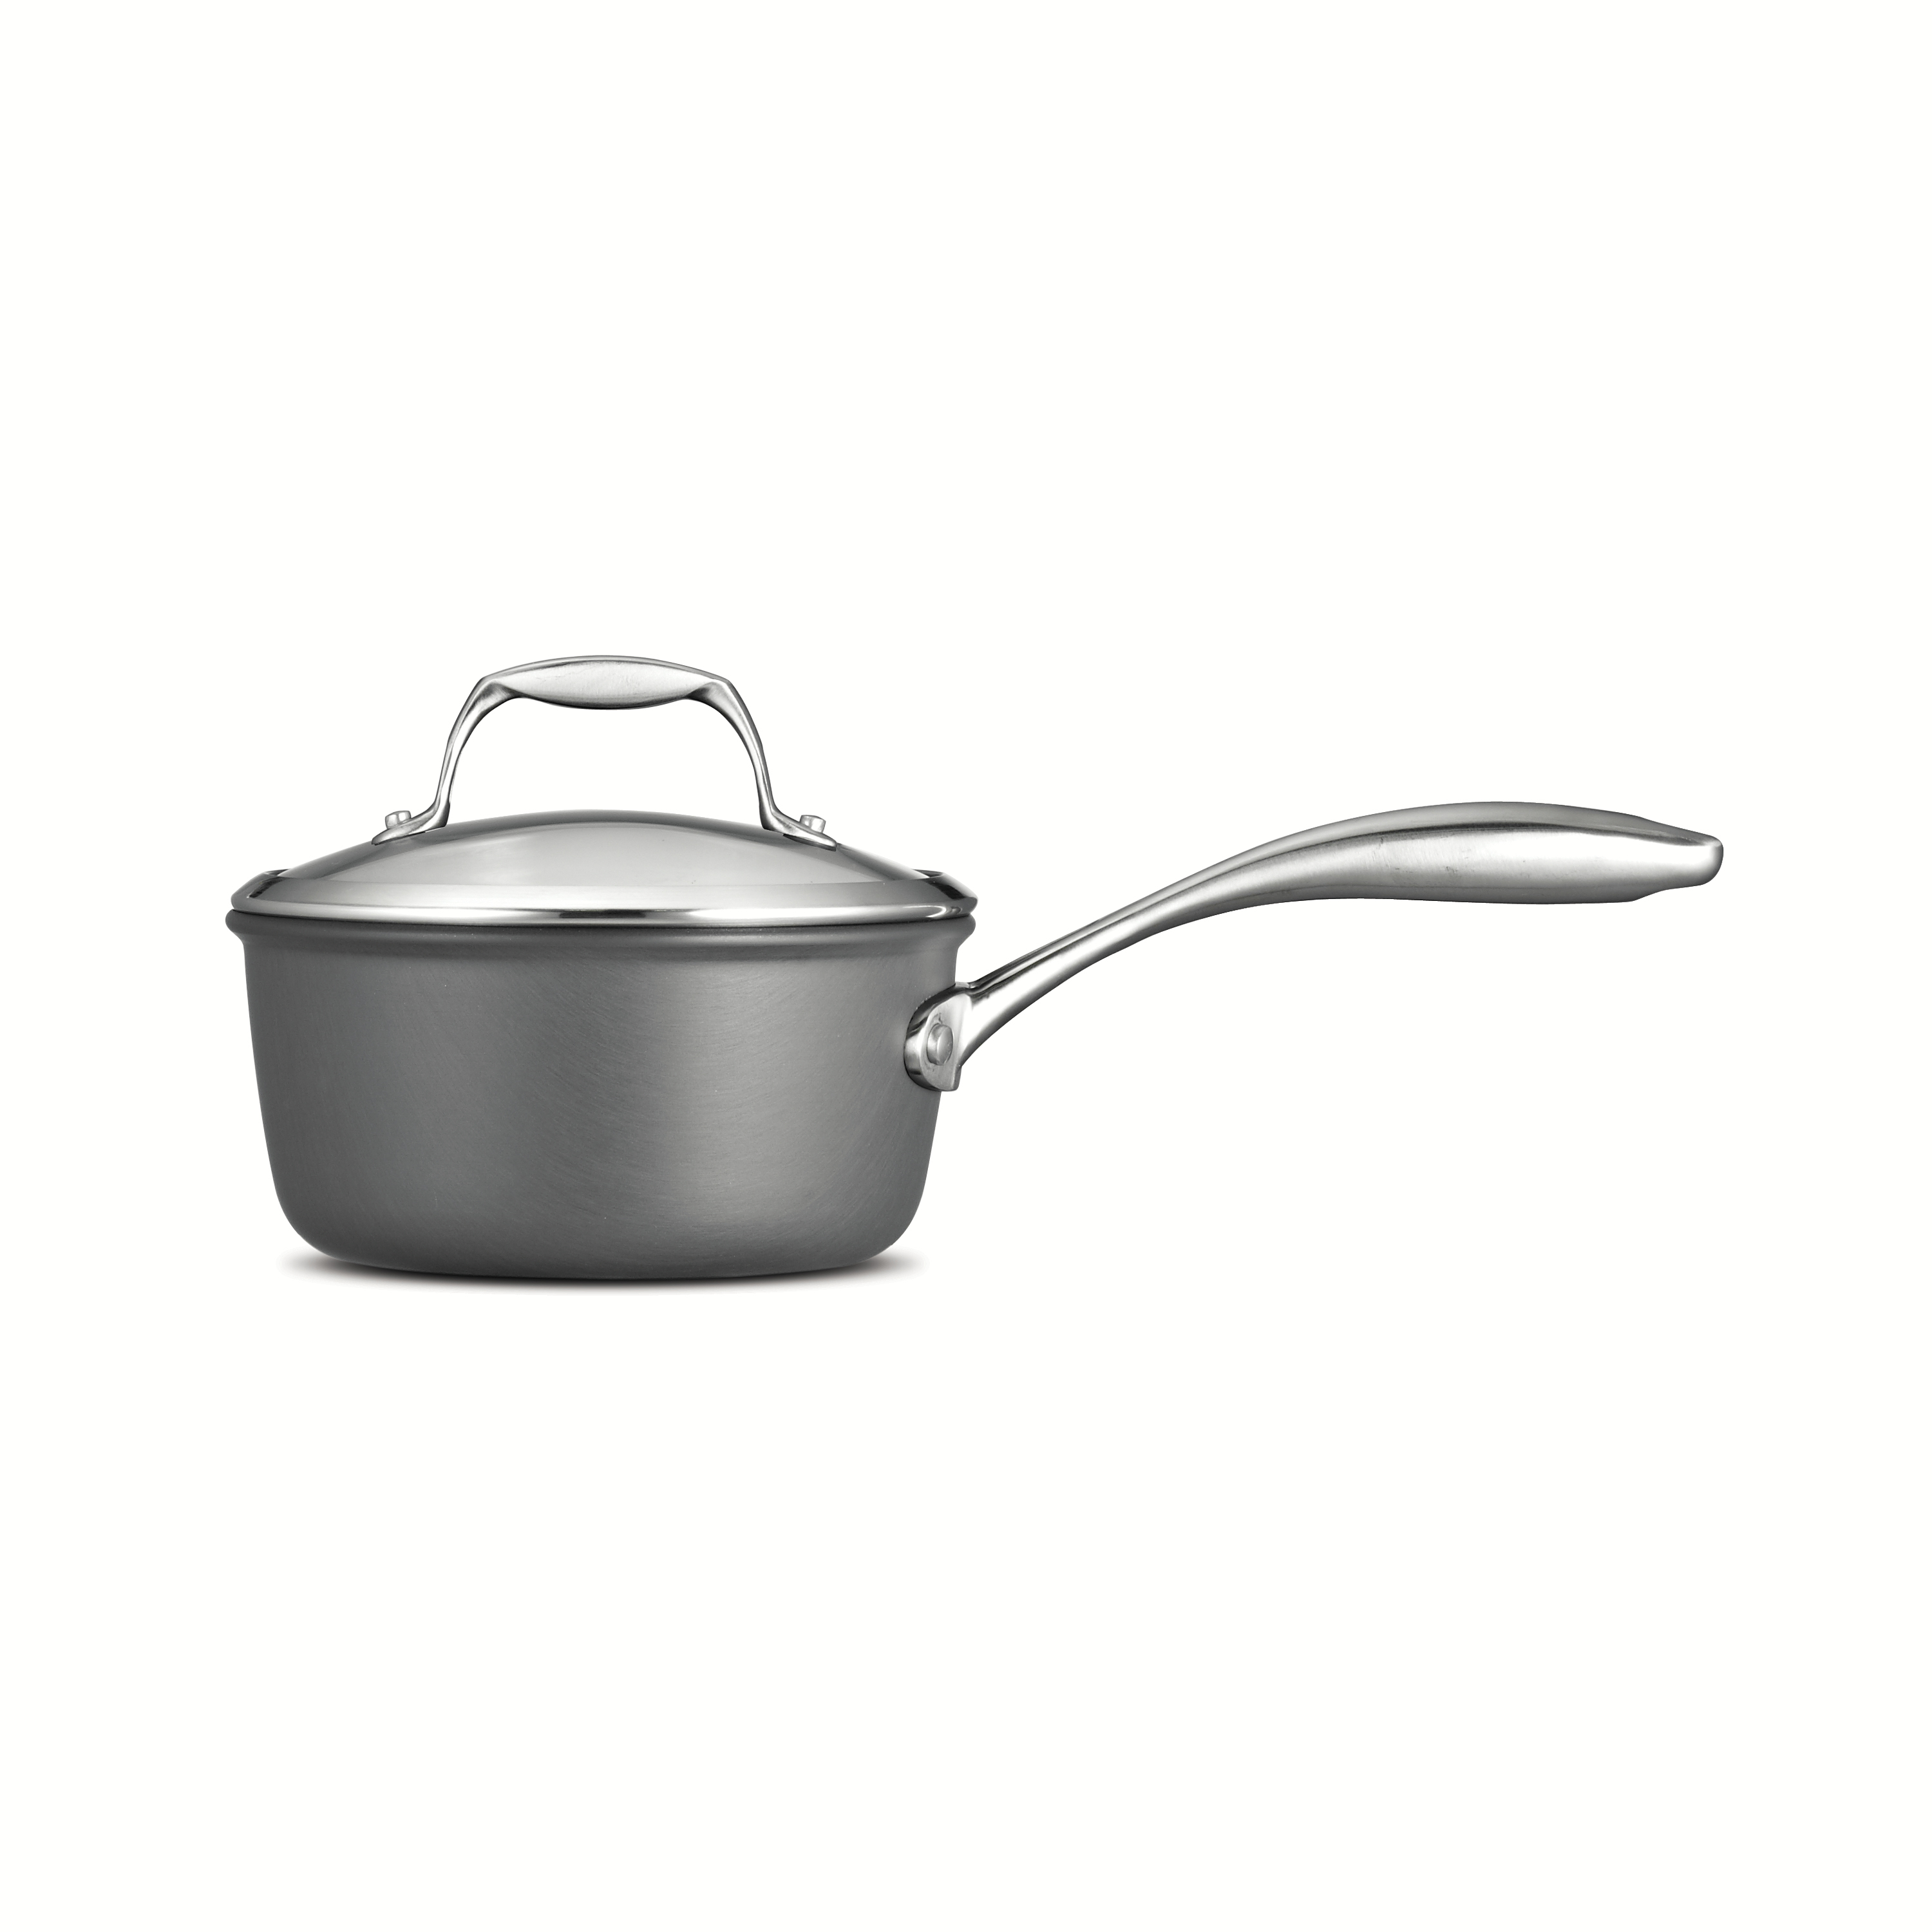 0016017028968 - GOURMET HARD ANODIZED 1.5 QT COVERED SAUCE PAN